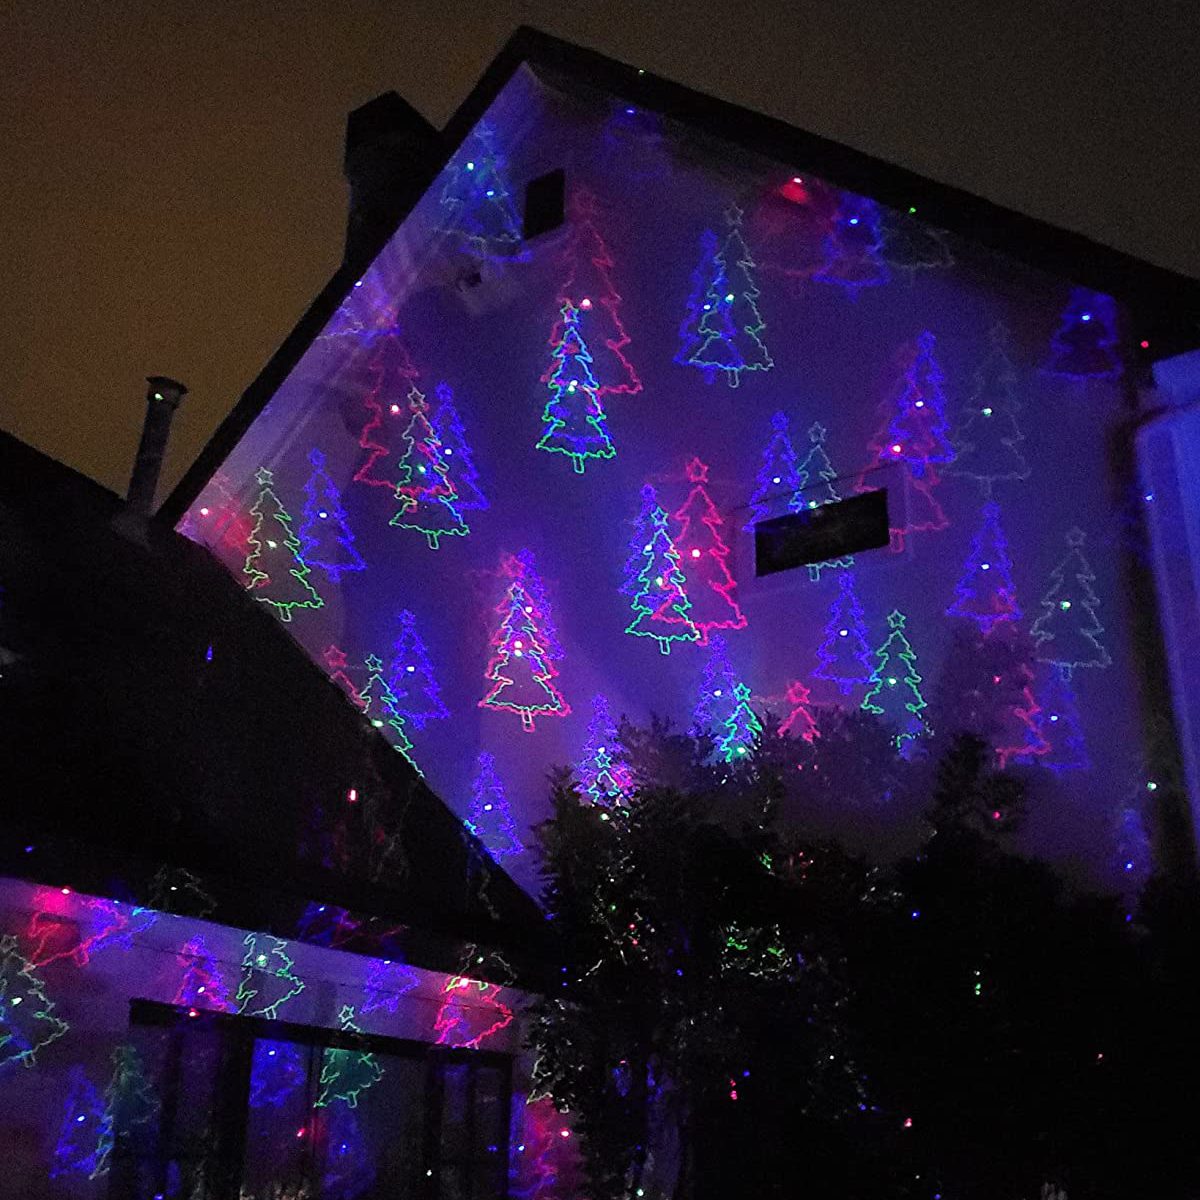 https://www.familyhandyman.com/wp-content/uploads/2020/12/Motion-Pattern-Firefly-3-Models-in-1-Continuous-18-Patterns-LEDMALL-RGB-Outdoor-Laser_ecomm-amazon.com_.jpg?fit=700%2C700